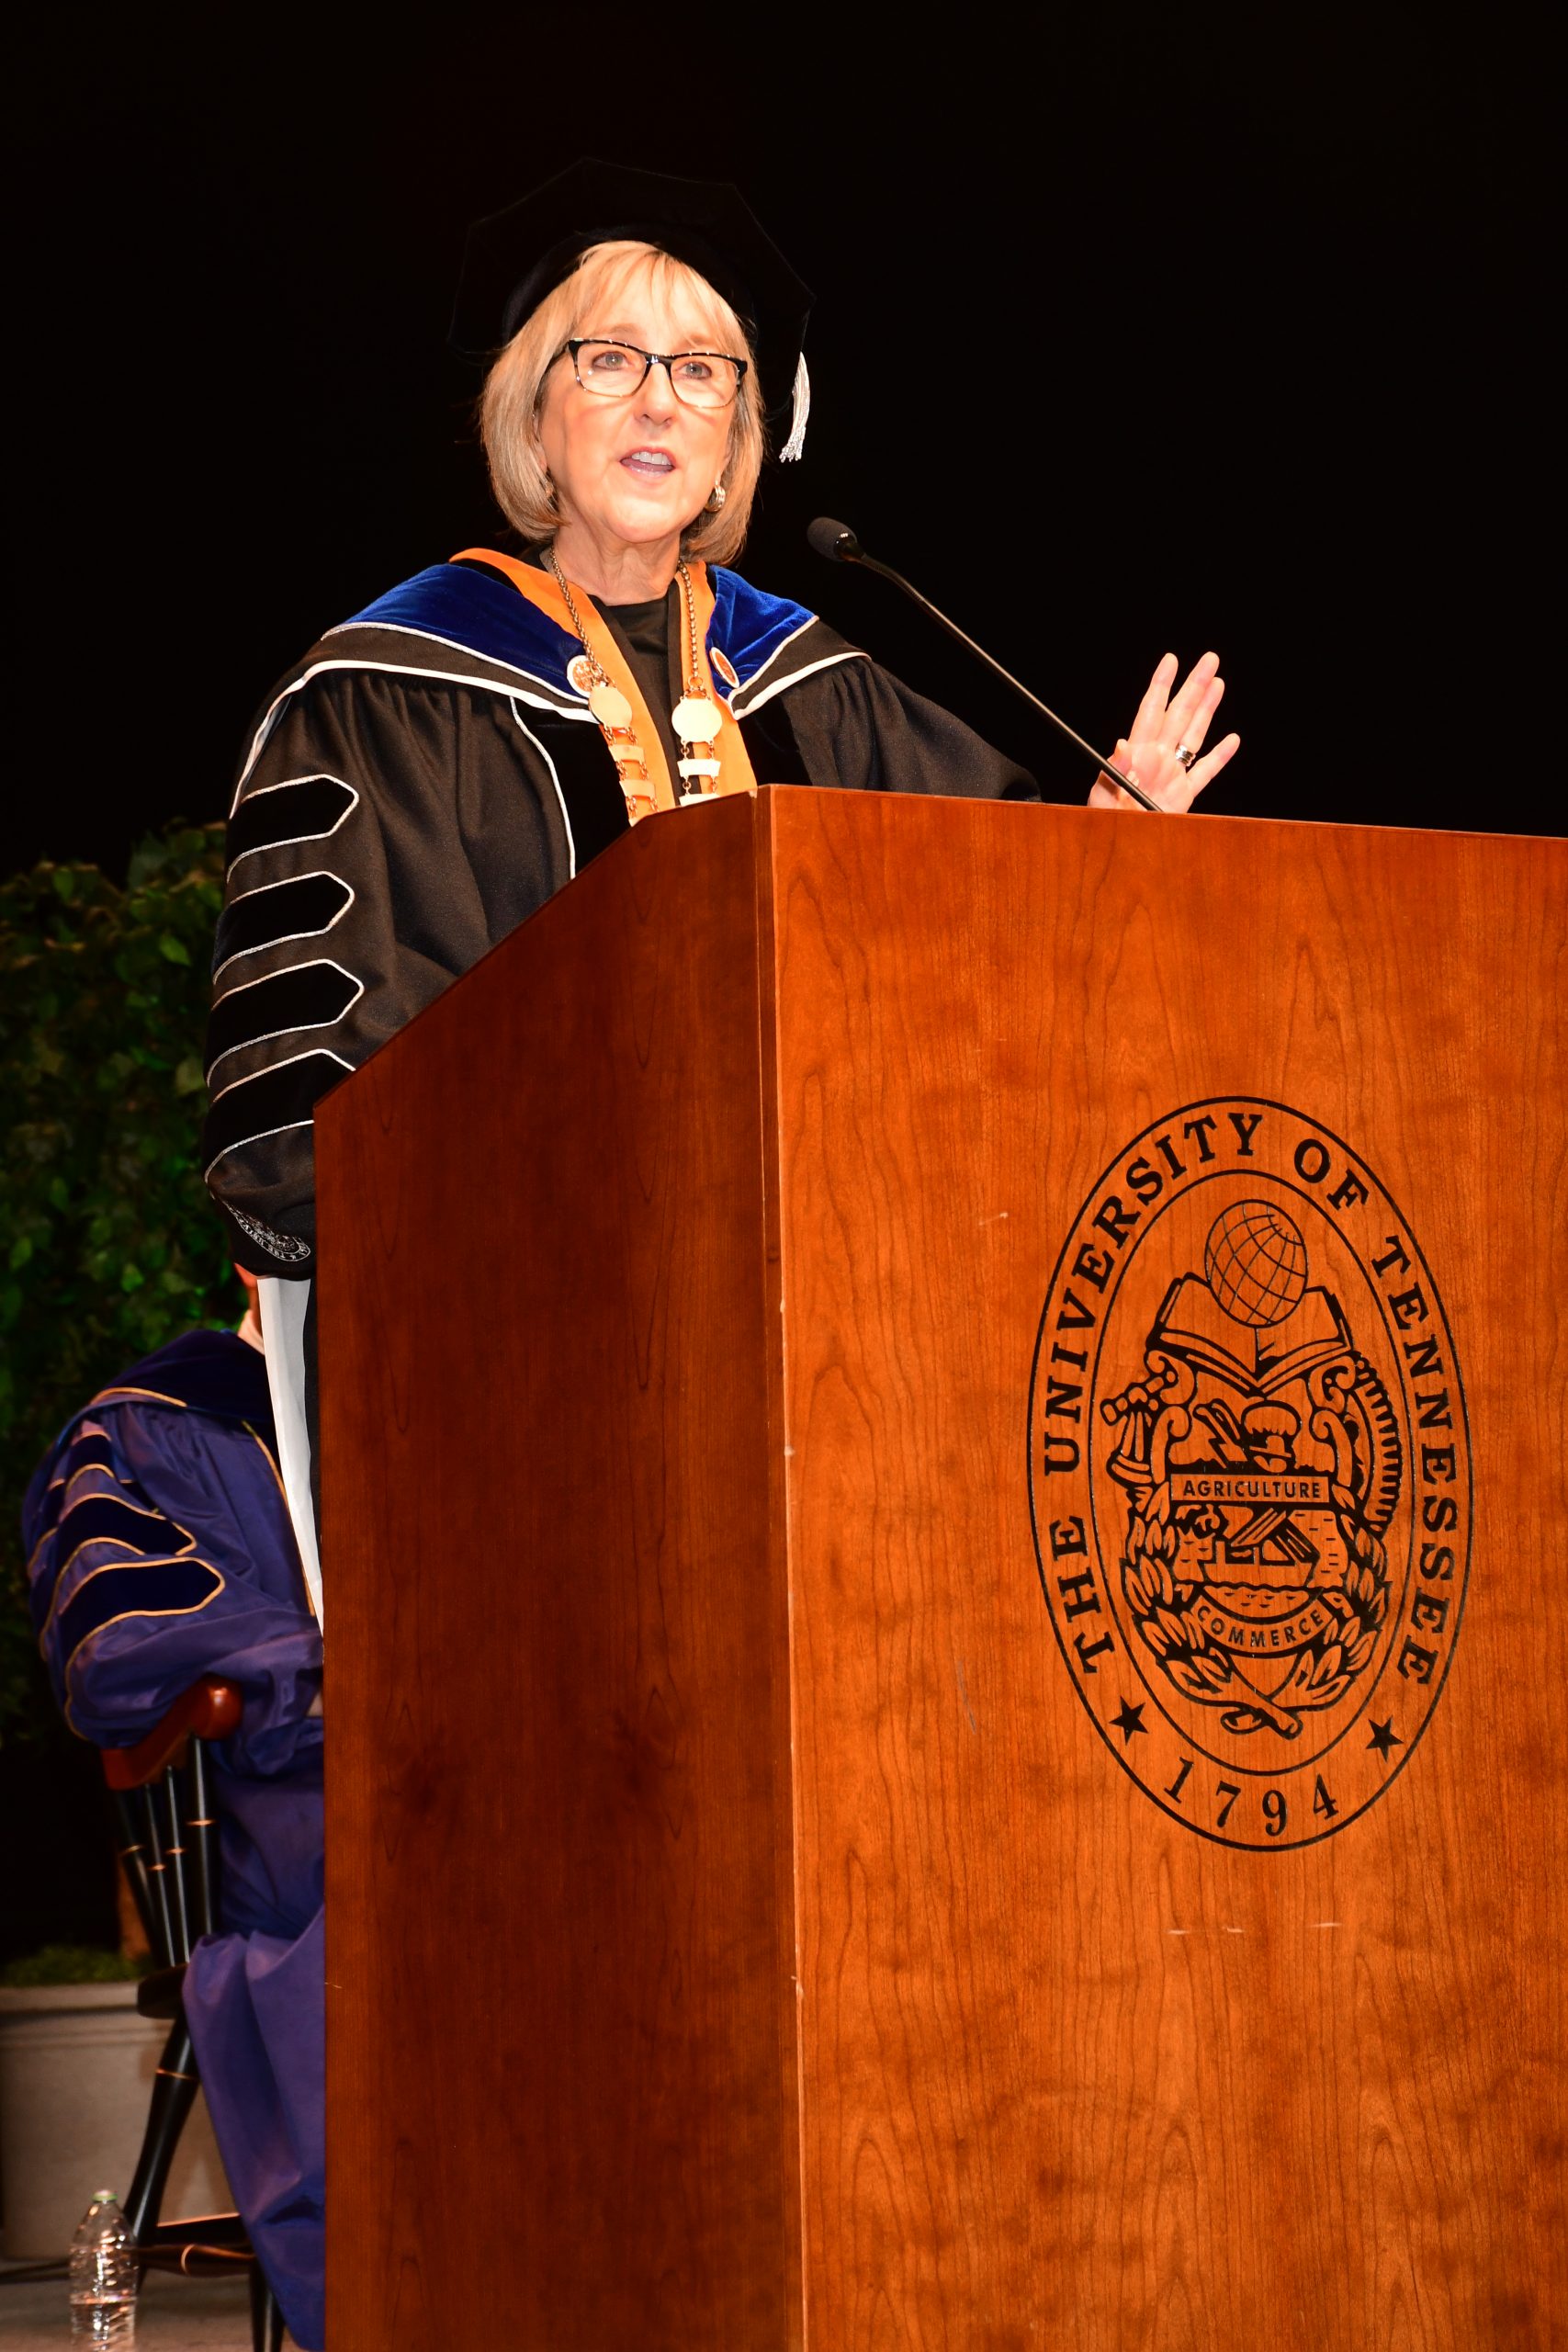 Donde Plowman speaking at commencement